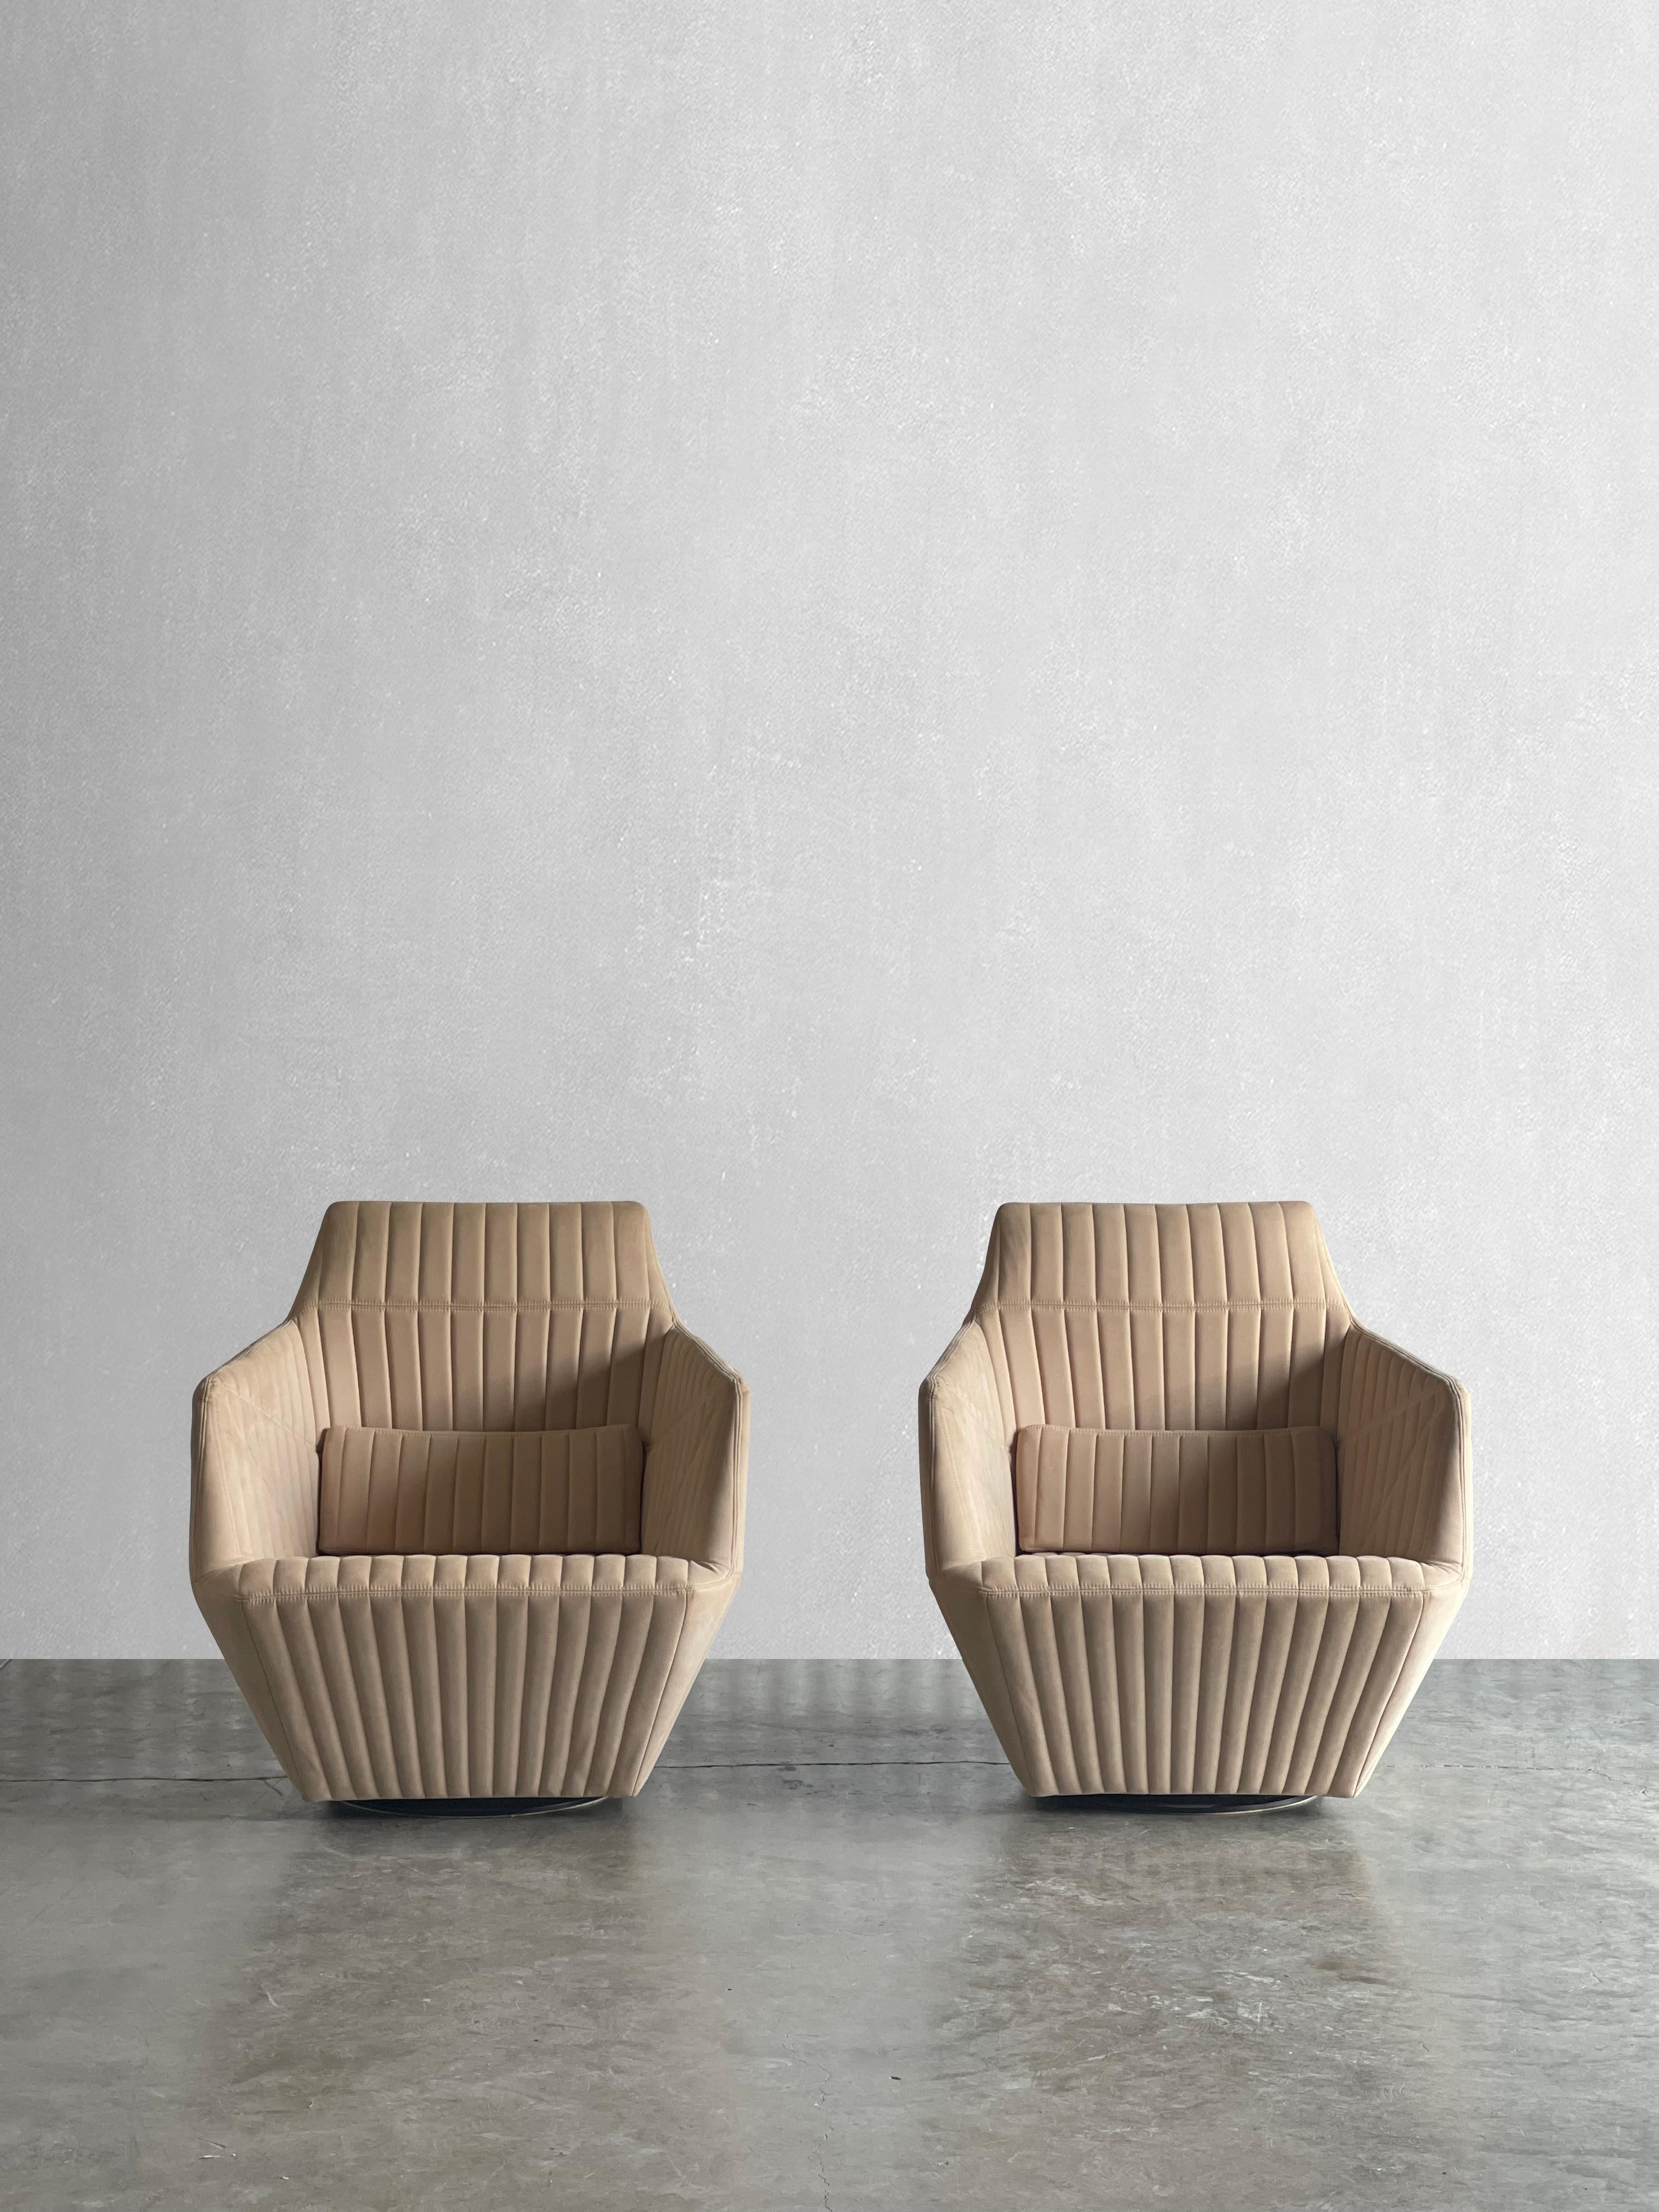 A pair of truly unique statement chairs. The stitching on the Facet chairs resembles the shape of a gemstone or origami. these chairs are upholstered in original stone colored alcantara fabric, which is in excellent condition. 


Dimensions:

33H x